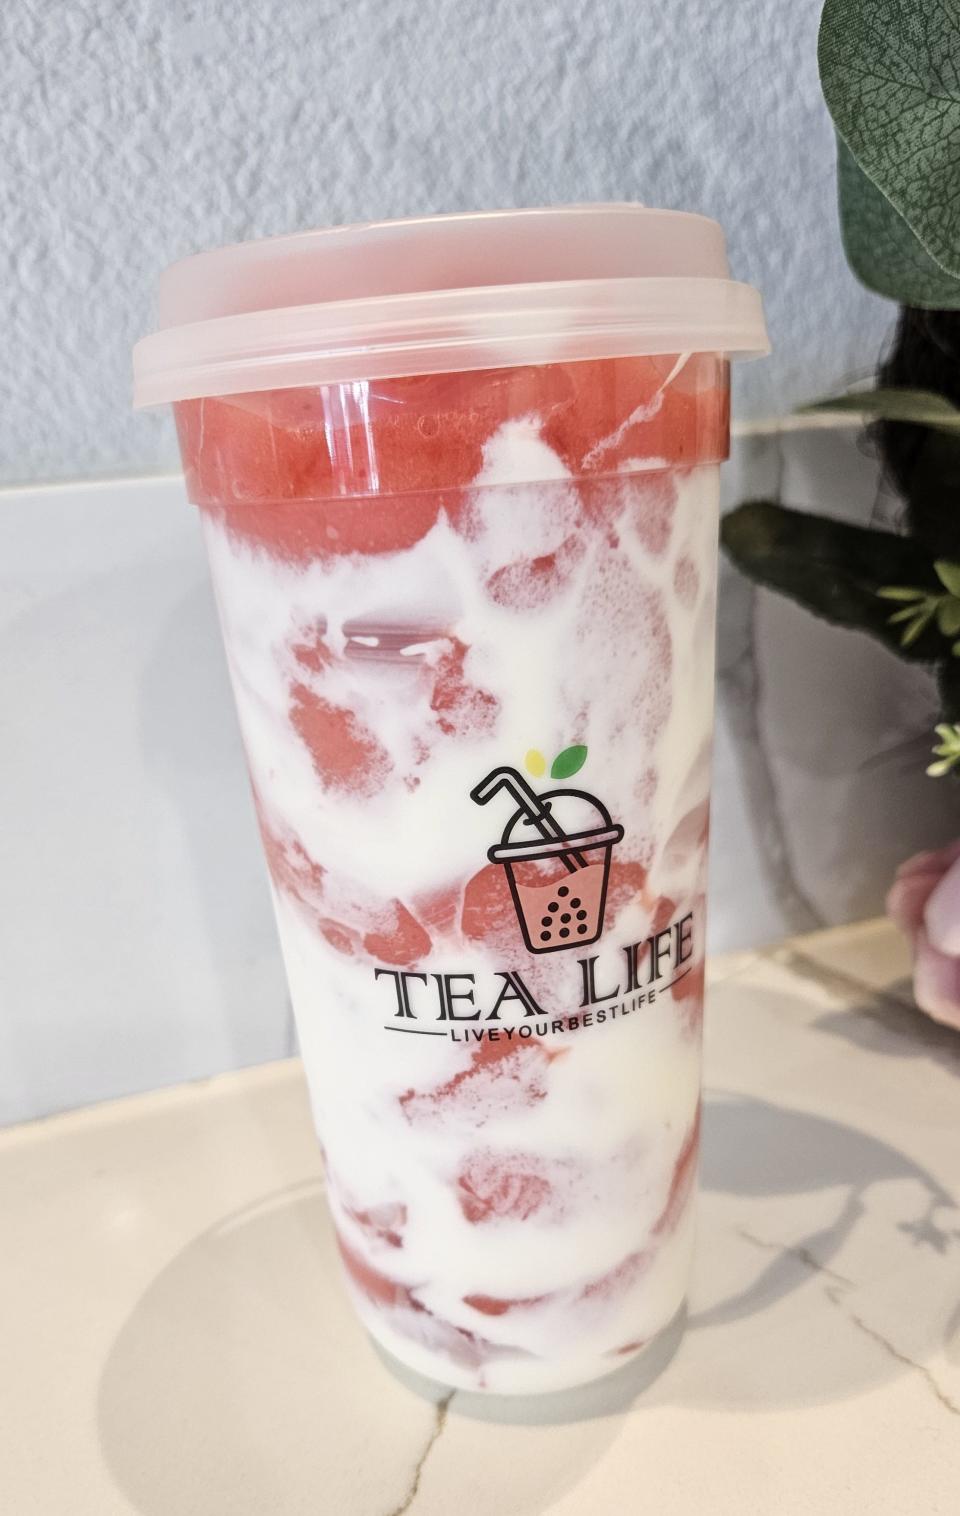 Beautiful and tasty, the Strawberry Tornado is delightful and refreshing.